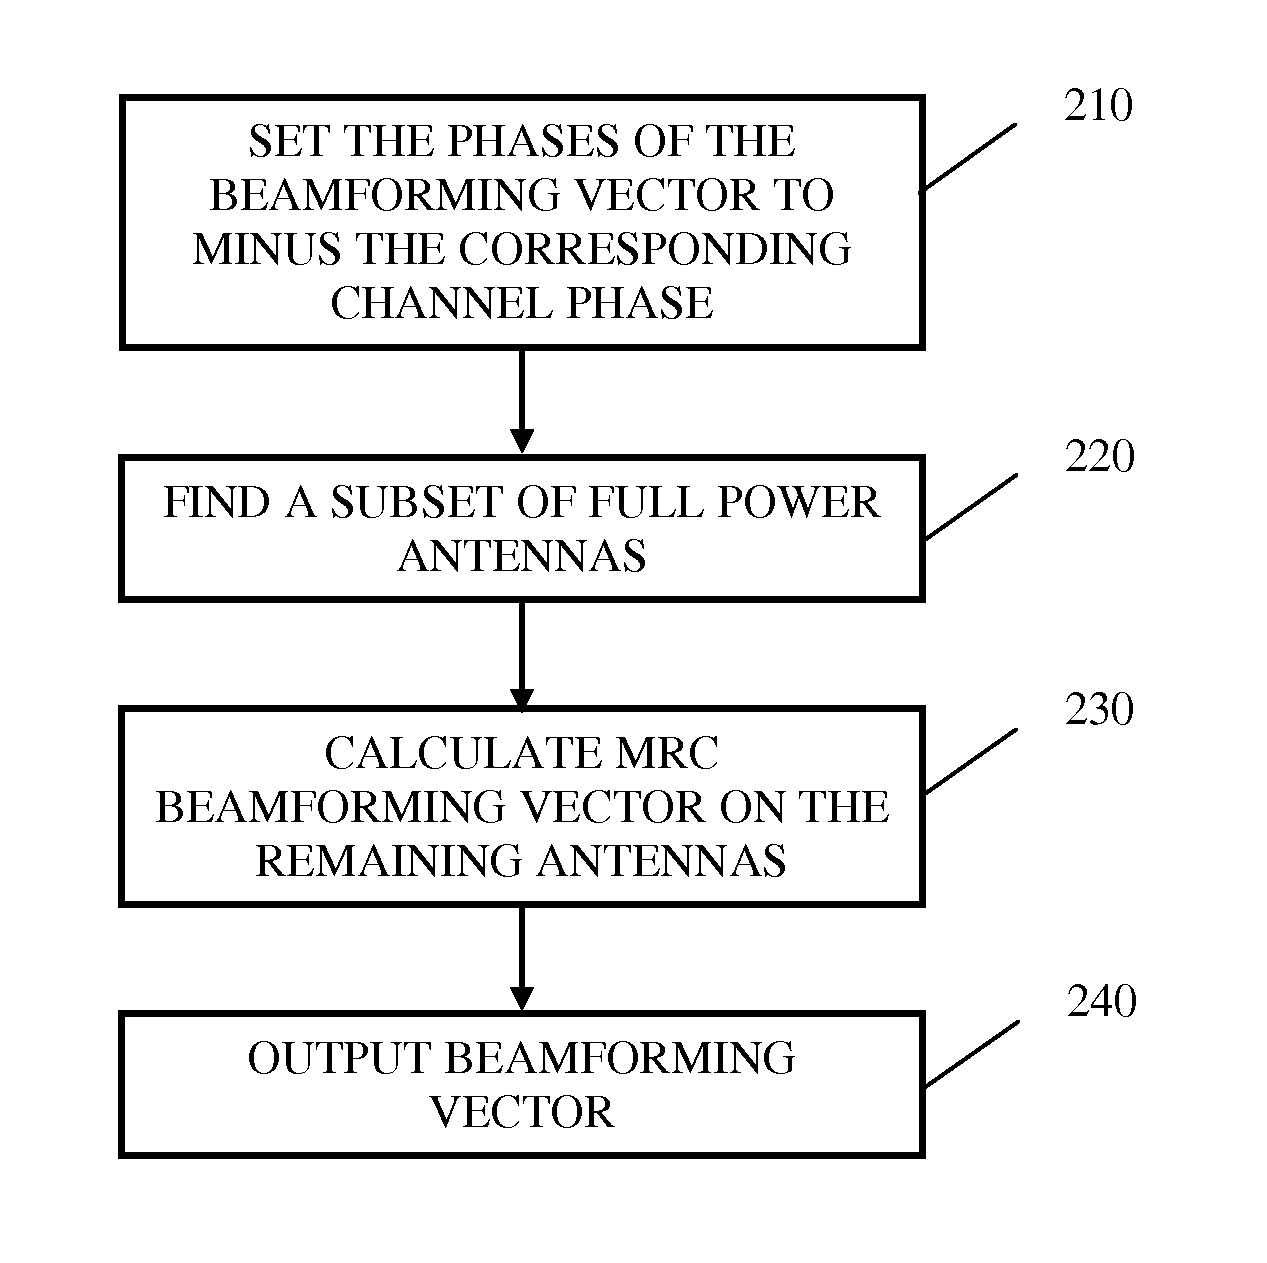 Method for single stream beamforming with mixed power constraints